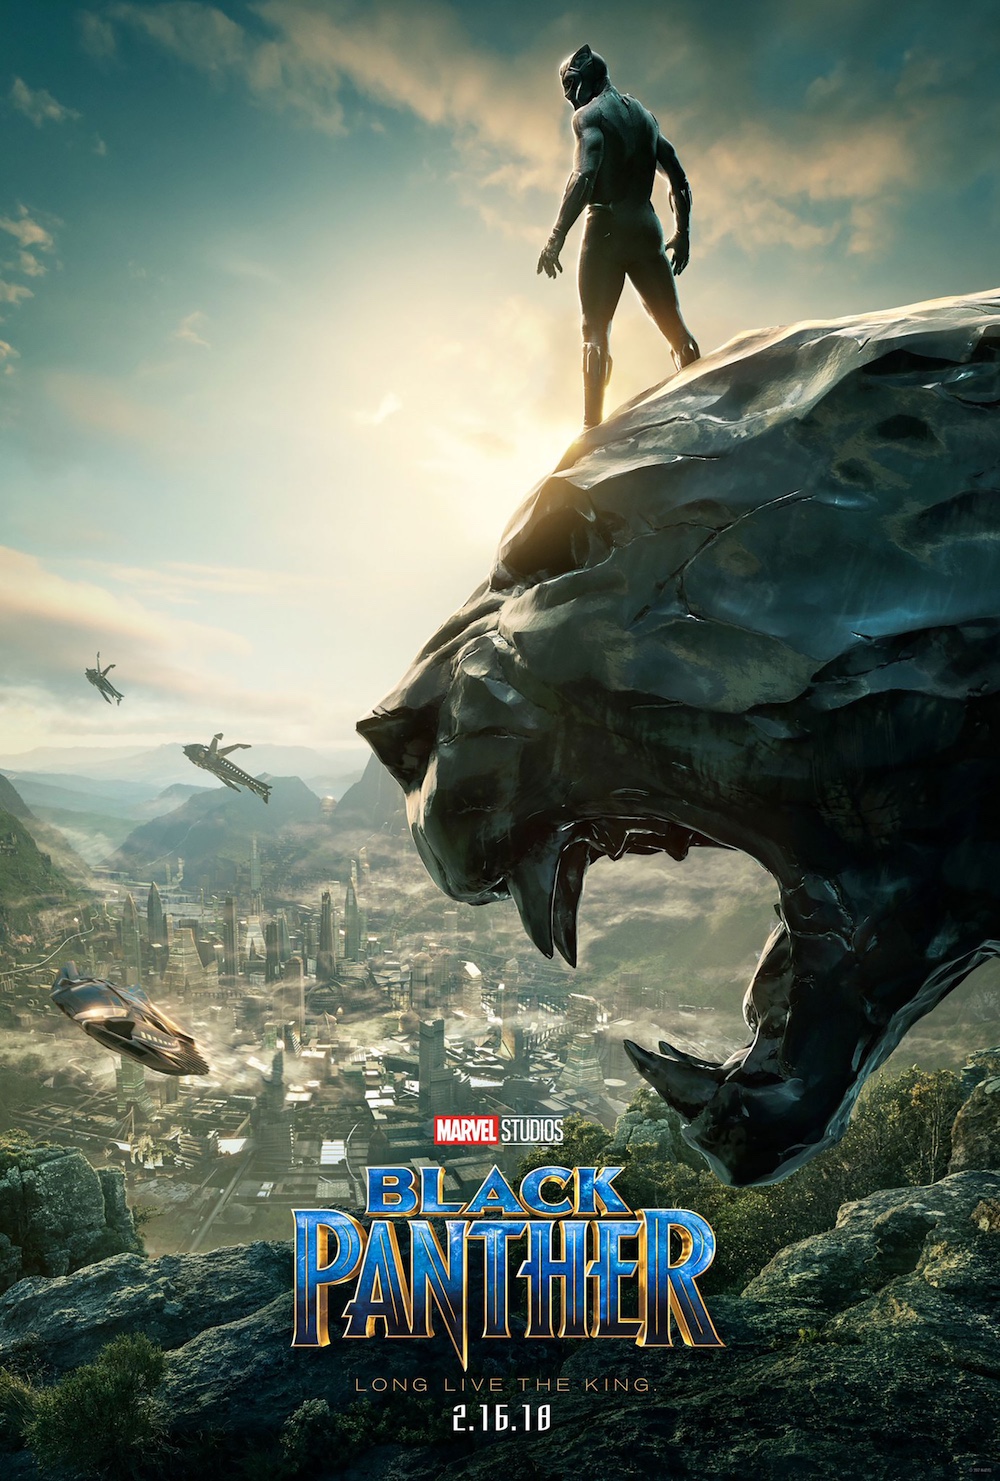 Black Panther protects Wakanda on the Marvel movie poster